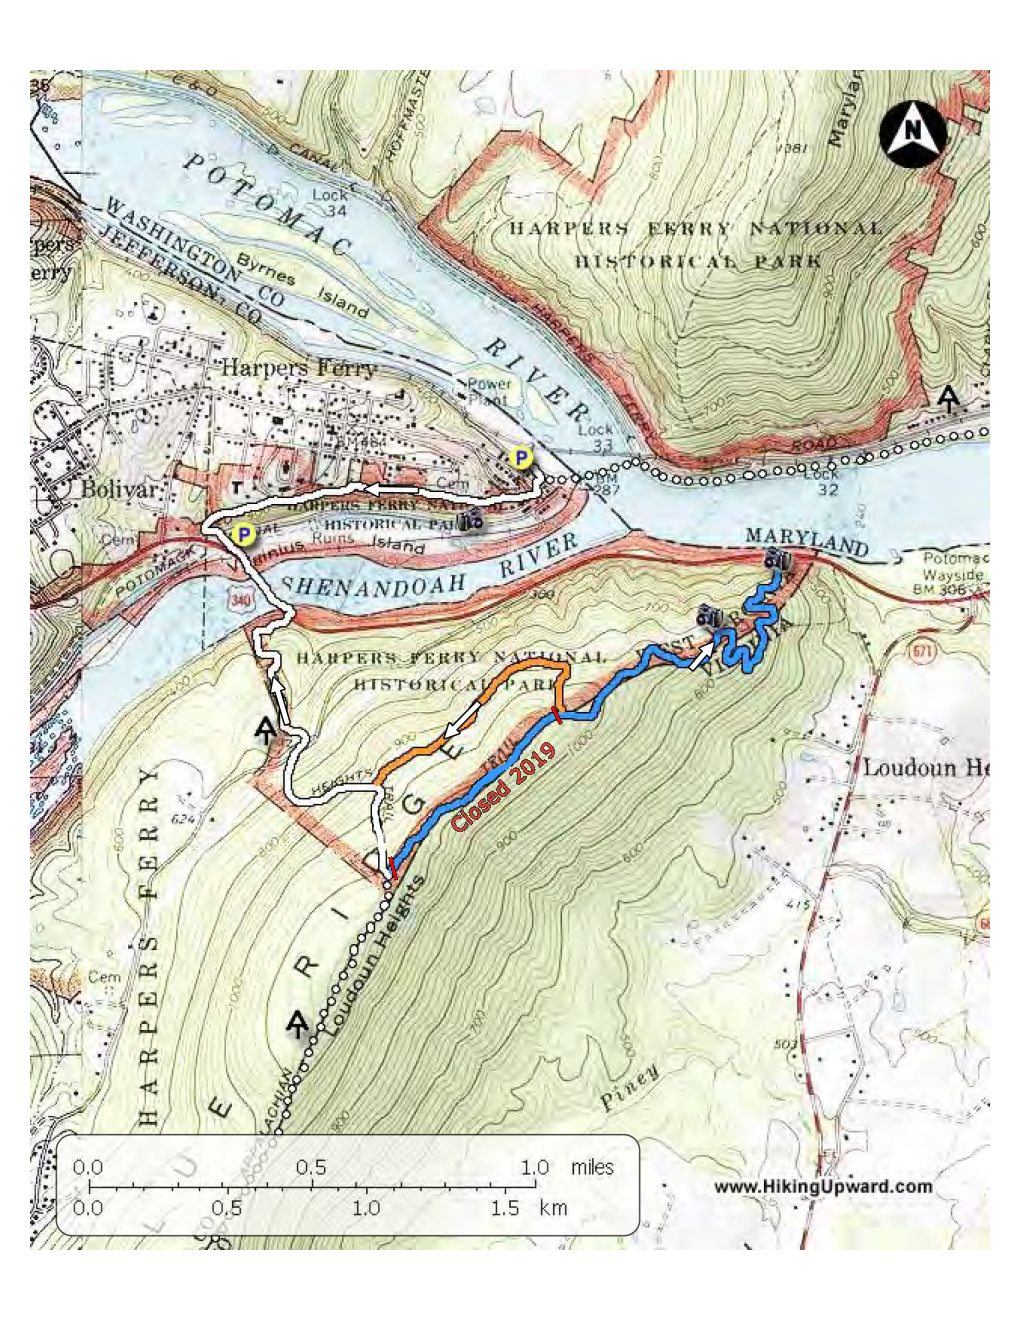 Harpers Ferry/Loudoun Heights - Harpers Ferry, WV